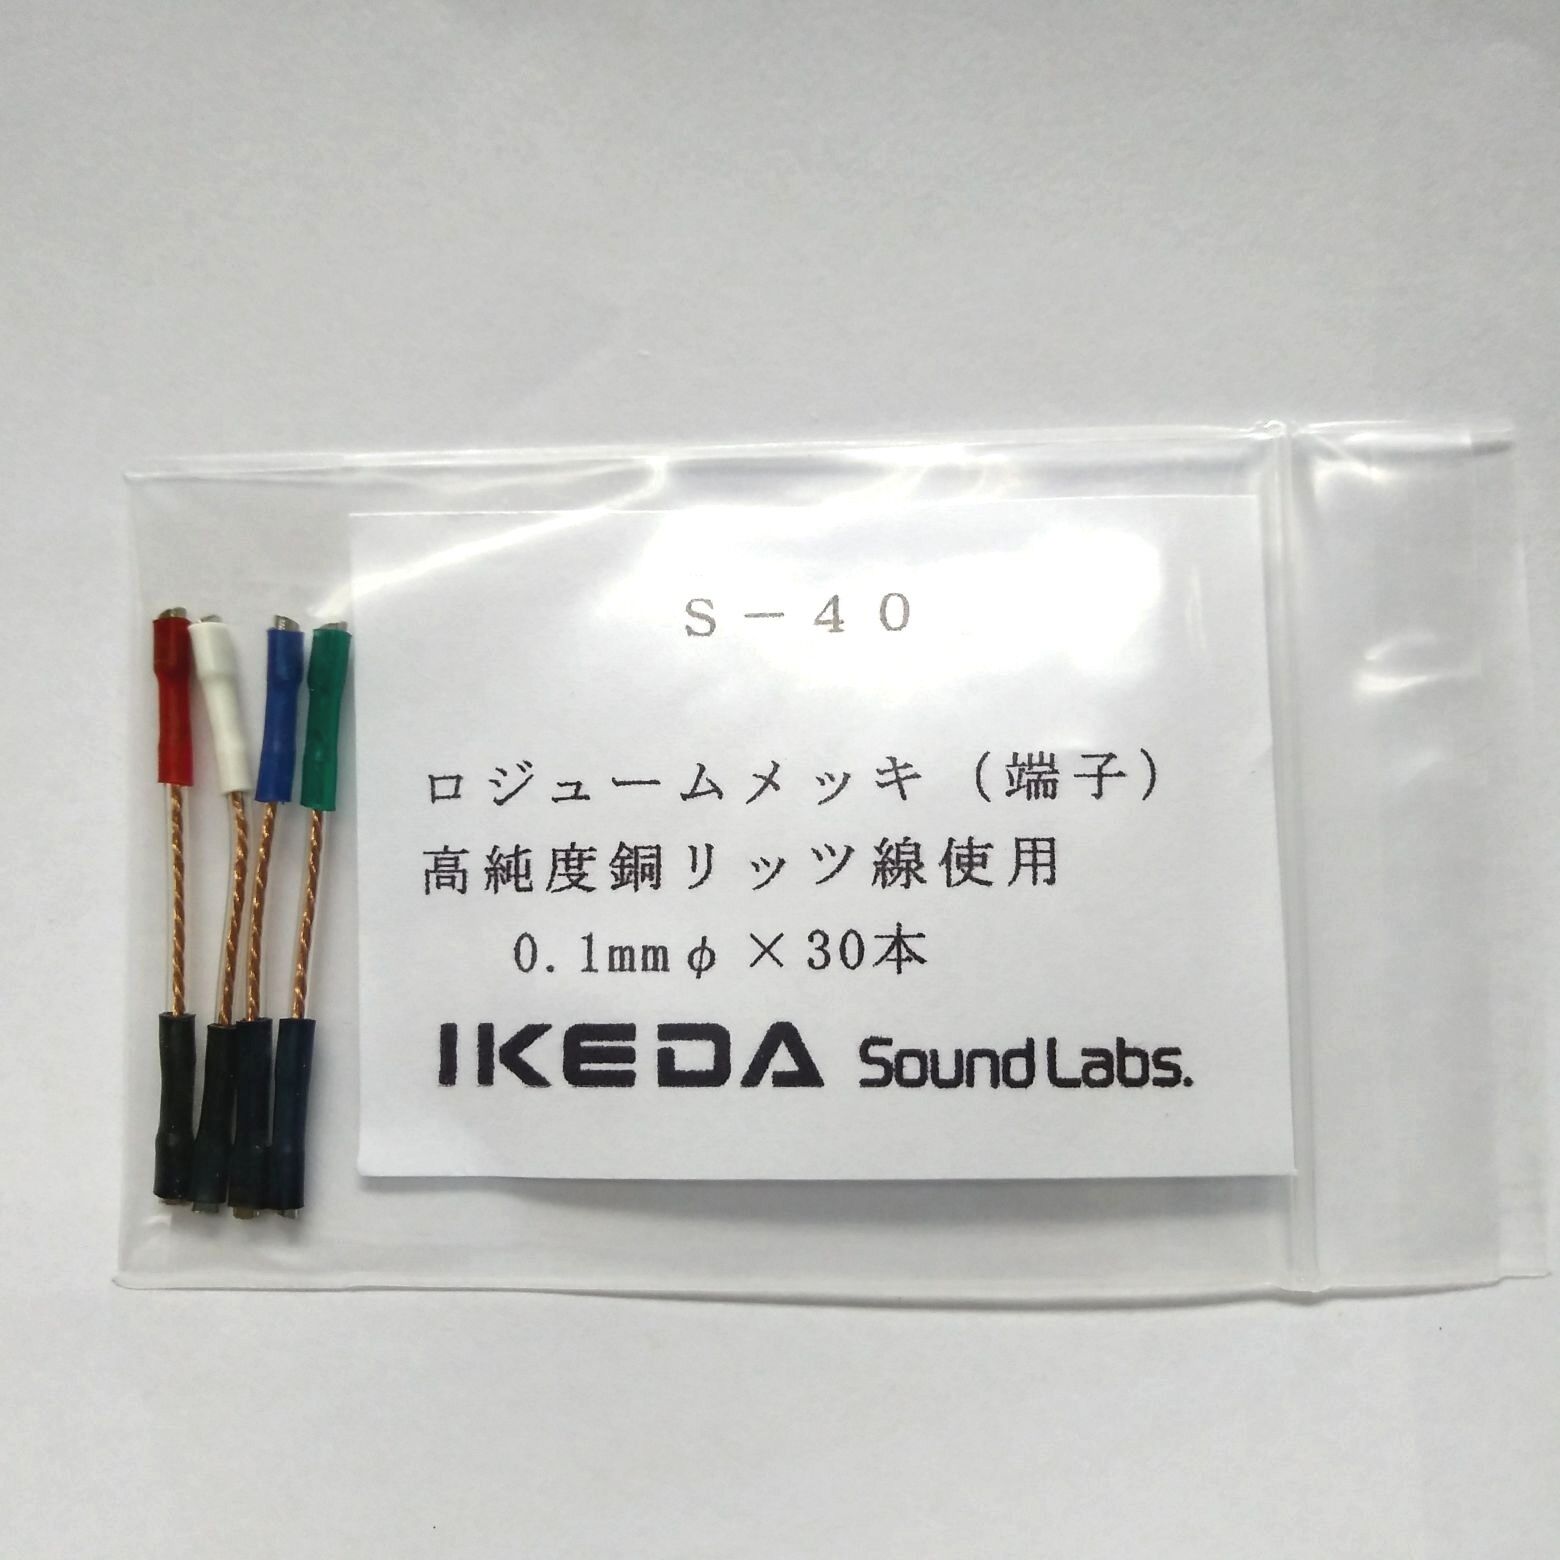 Ikeda S40 Cartridge Copper Leads , MADE IN JAPAN